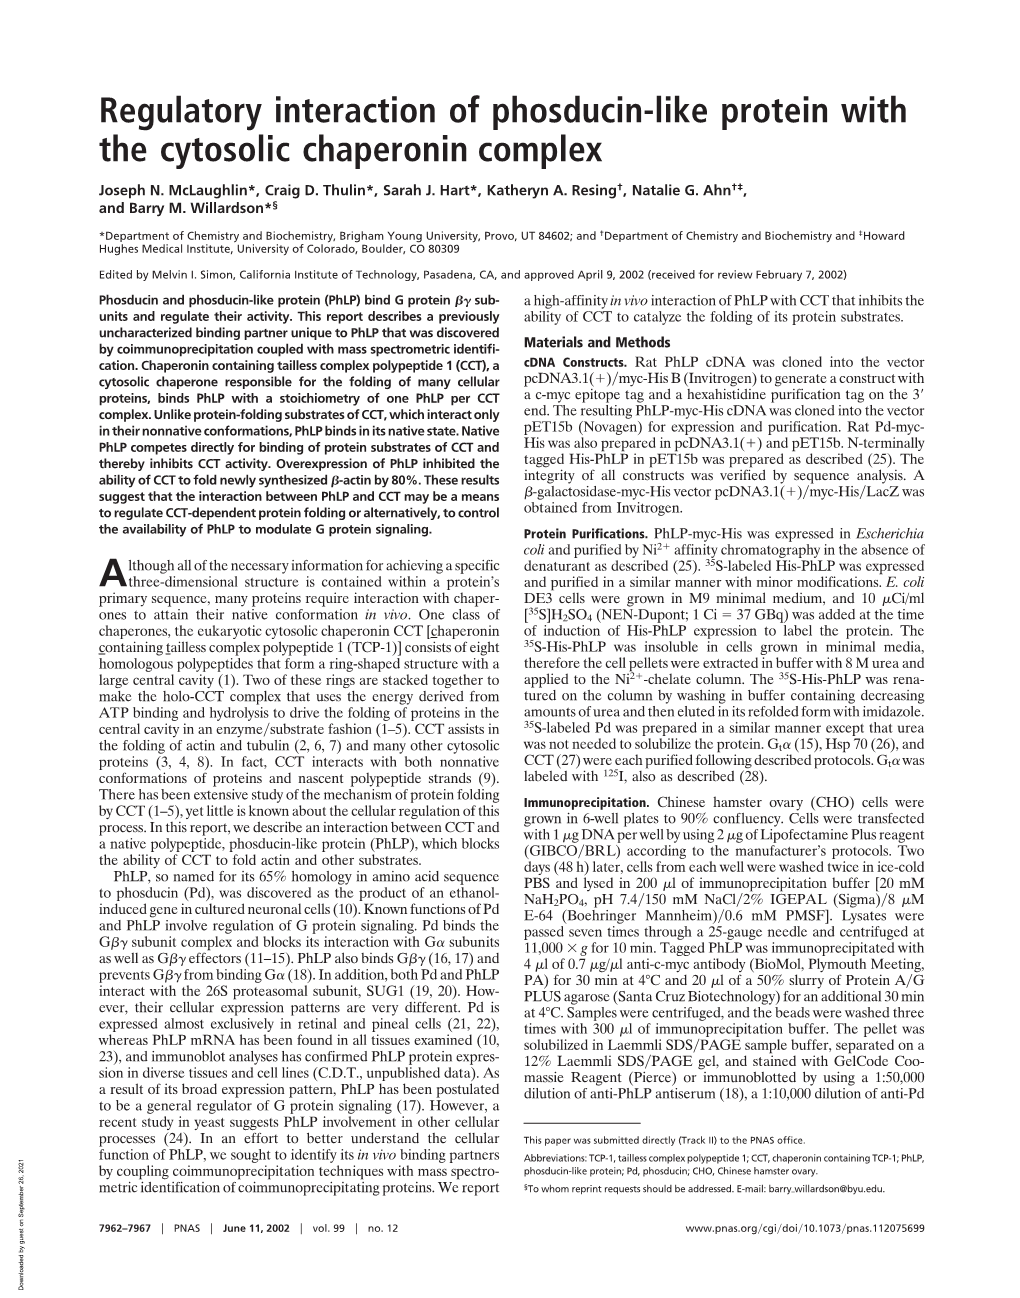 Regulatory Interaction of Phosducin-Like Protein with the Cytosolic Chaperonin Complex